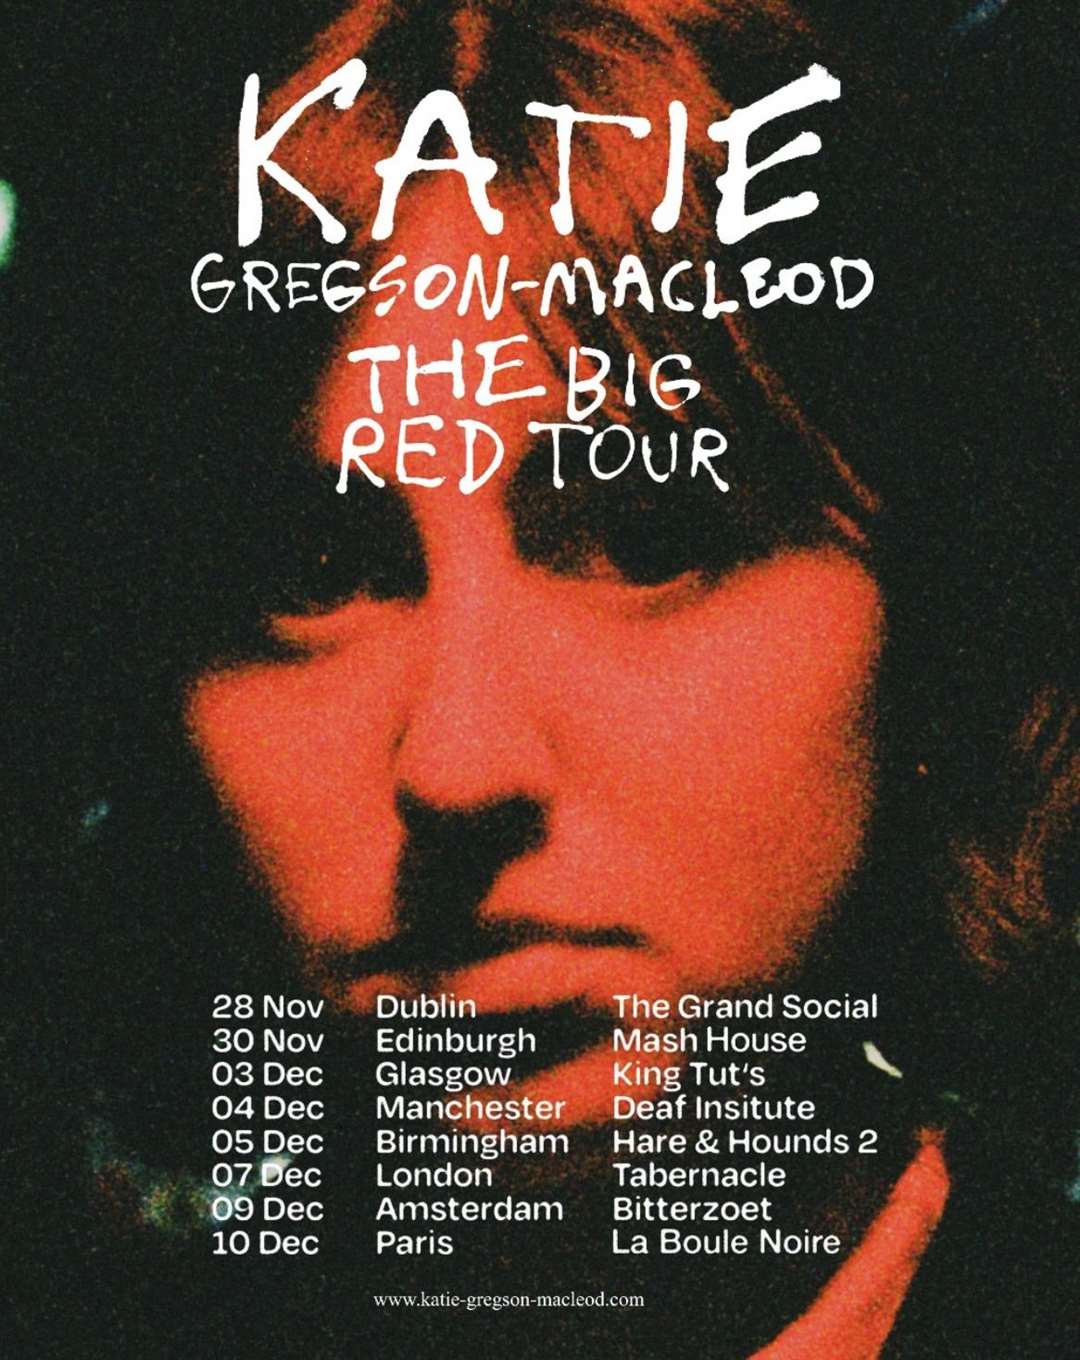 The tour dates for Katie Gregson-MacLeod's first UK tour just announced last week.